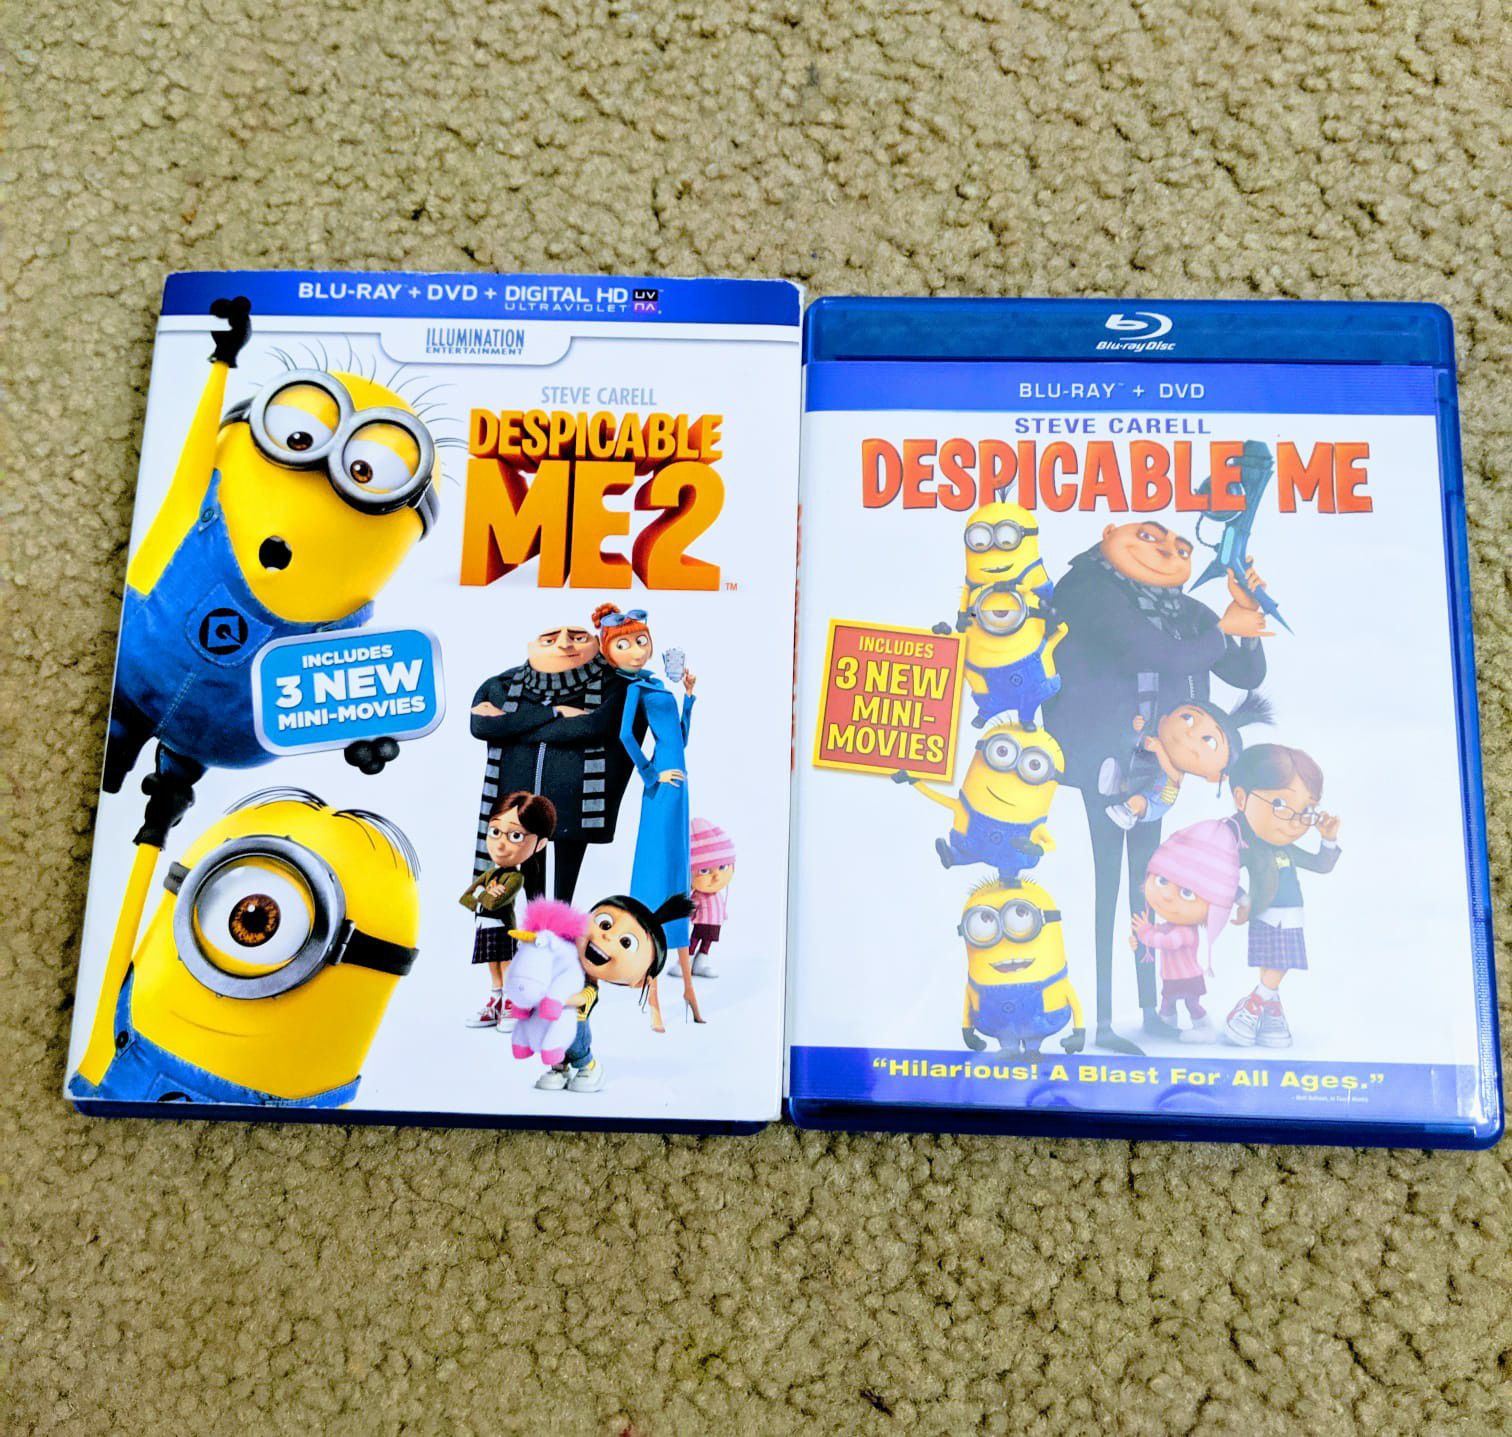 Despicable Me 1 and 2 (Blu Ray + DVD)